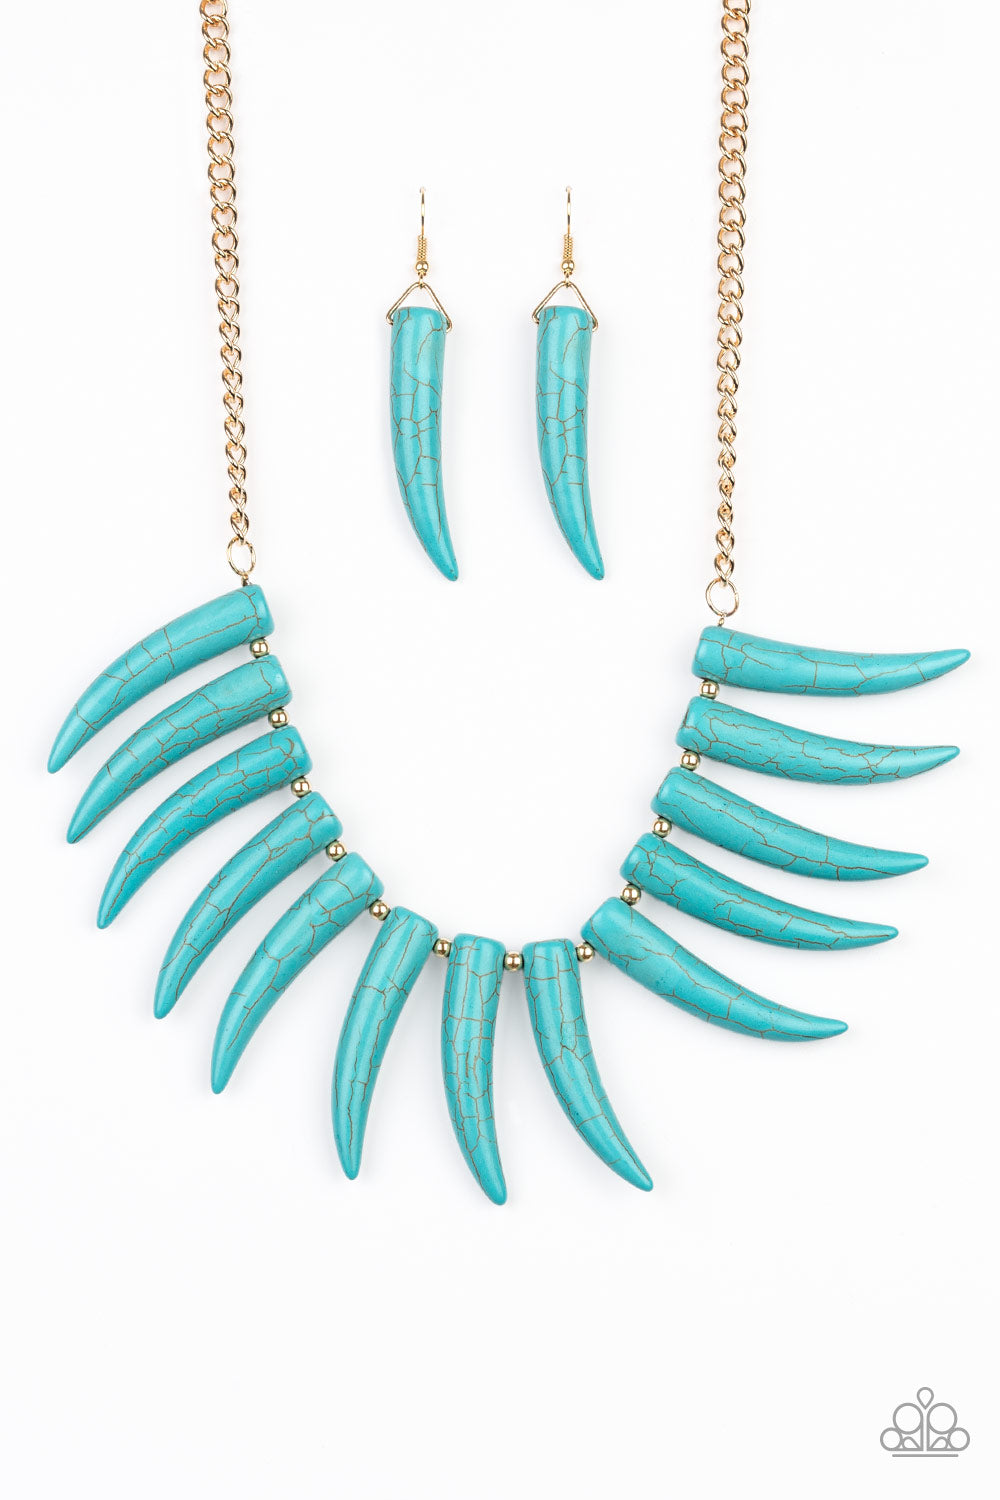 Paparazzi Tusk Tundra Blue Turquoise Stone Short Necklace - Life of the Party Exclusive August 2020